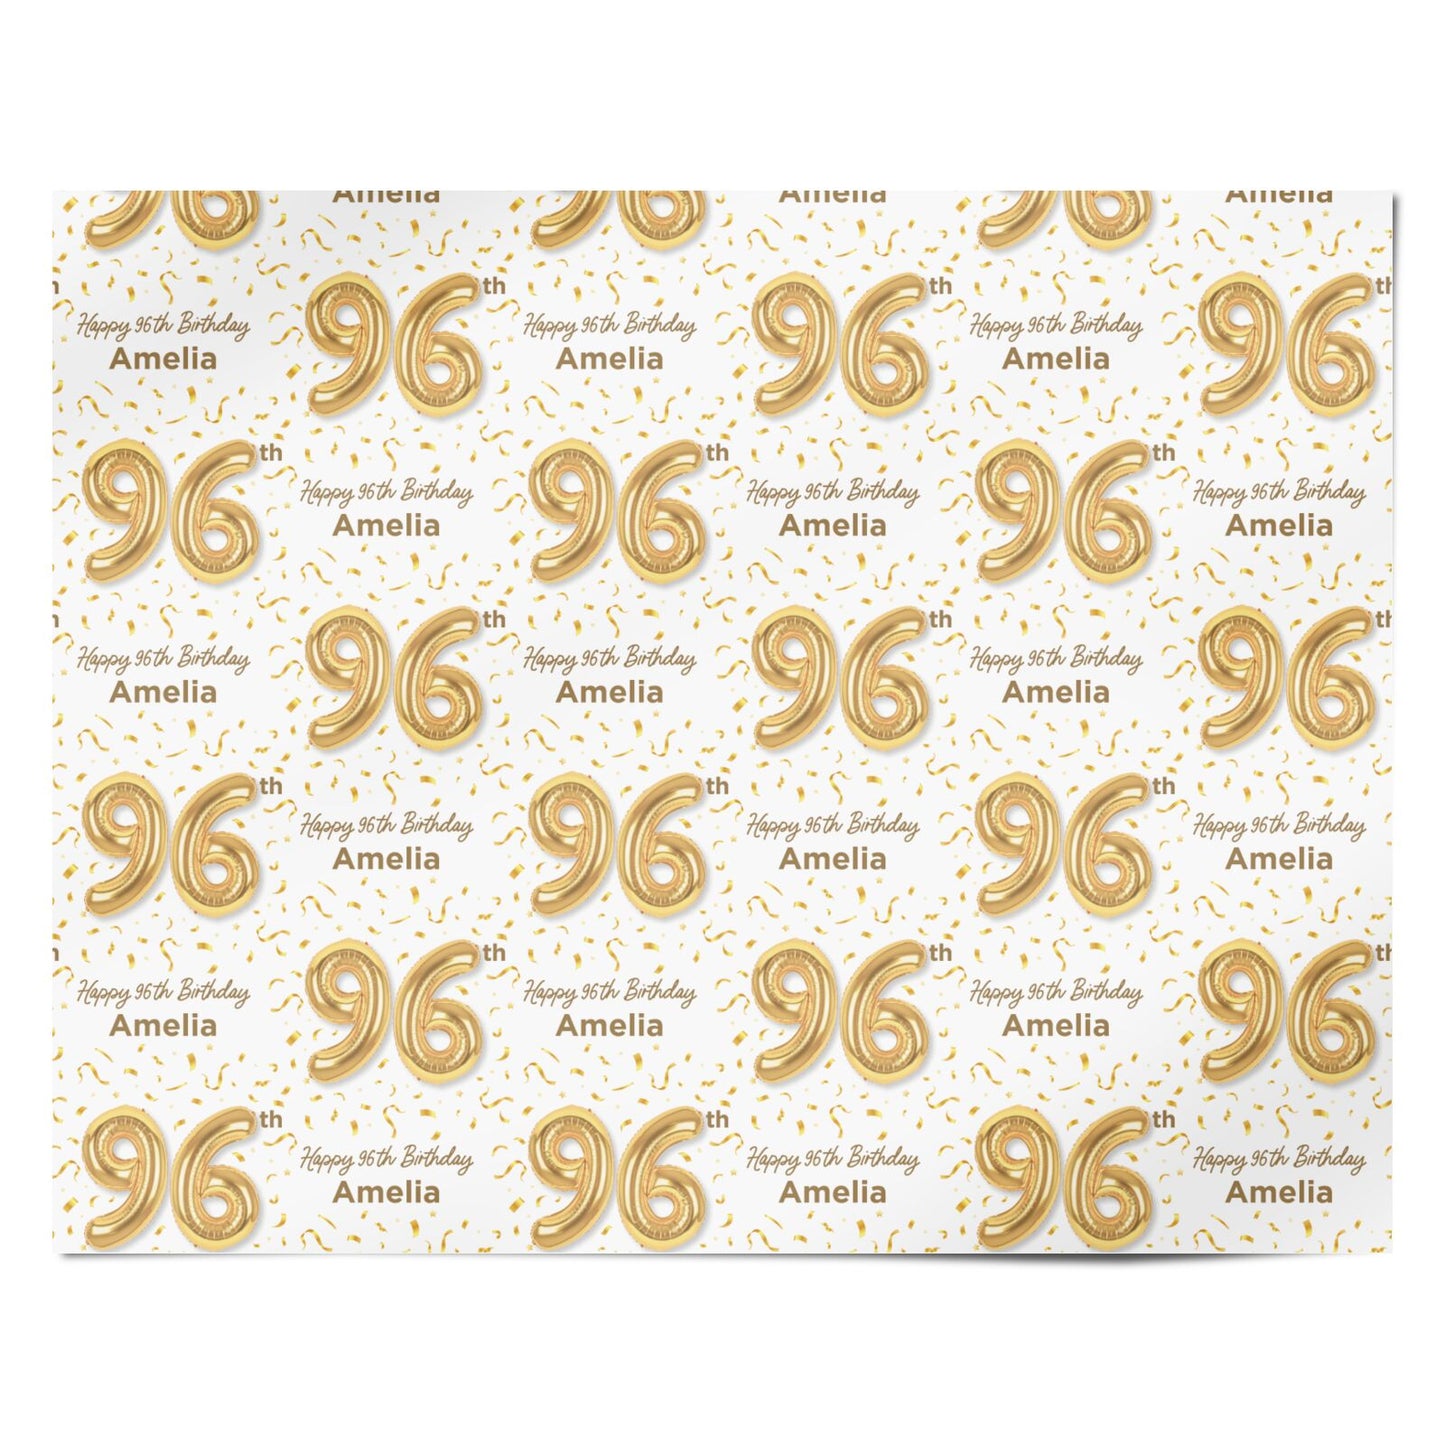 Personalised 96th Birthday Personalised Wrapping Paper Alternative